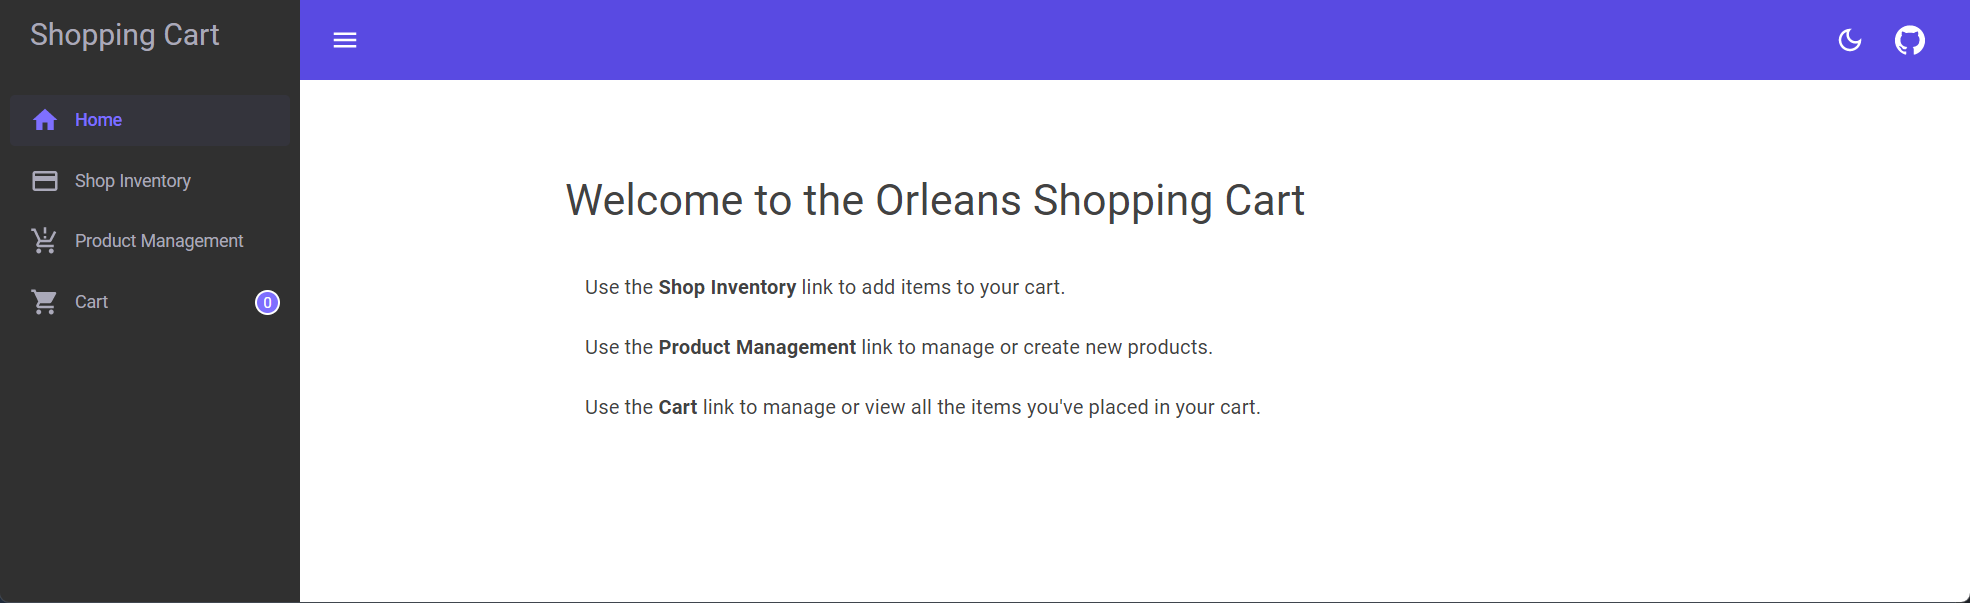 Orleans: Shopping Cart sample app, home page.